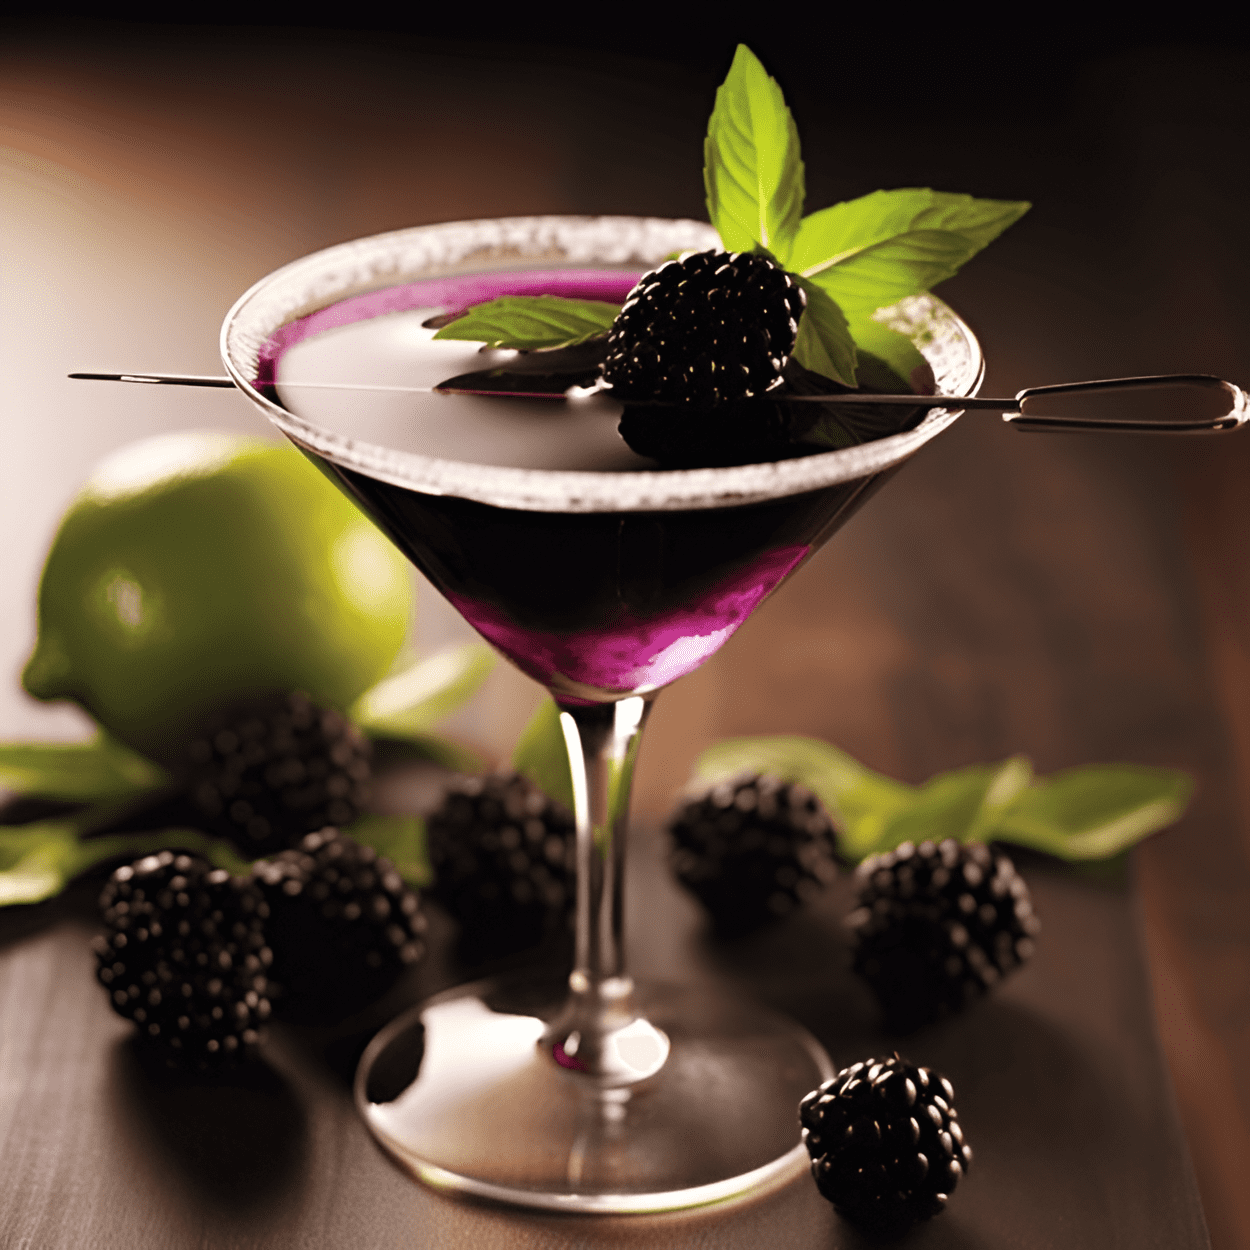 Blackberry Sage Martini Cocktail Recipe - This cocktail is a delightful blend of sweet, tart, and herbal flavors. The blackberries provide a sweet and slightly tart taste, while the sage adds a subtle earthy and peppery flavor. The vodka gives it a strong kick, but the sweetness of the blackberries and the simple syrup balance it out perfectly.